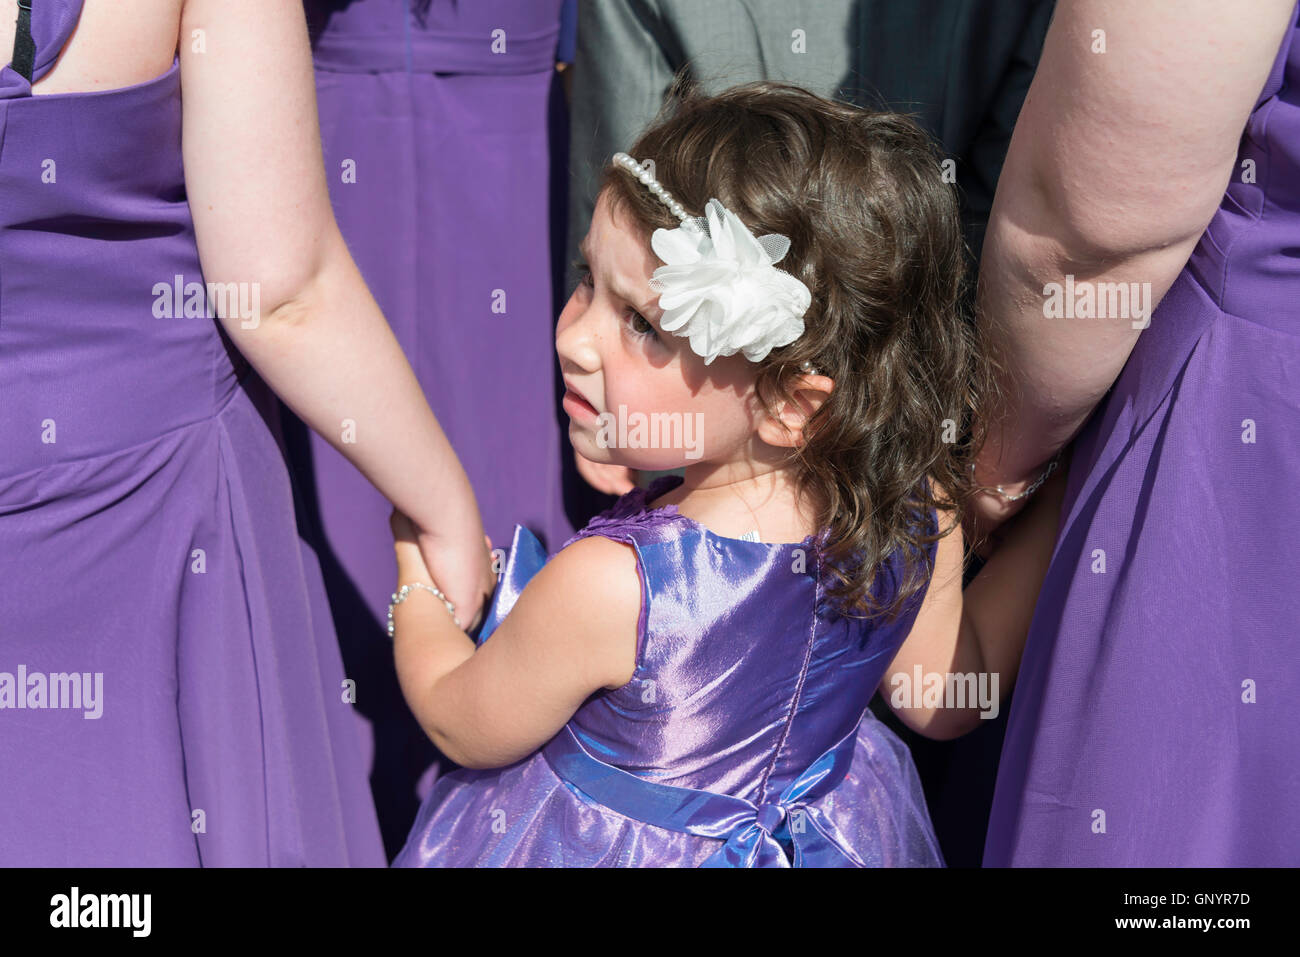 Young bridesmaid at wedding, Staines-upon-Thames, Surrey, England, United Kingdom Stock Photo